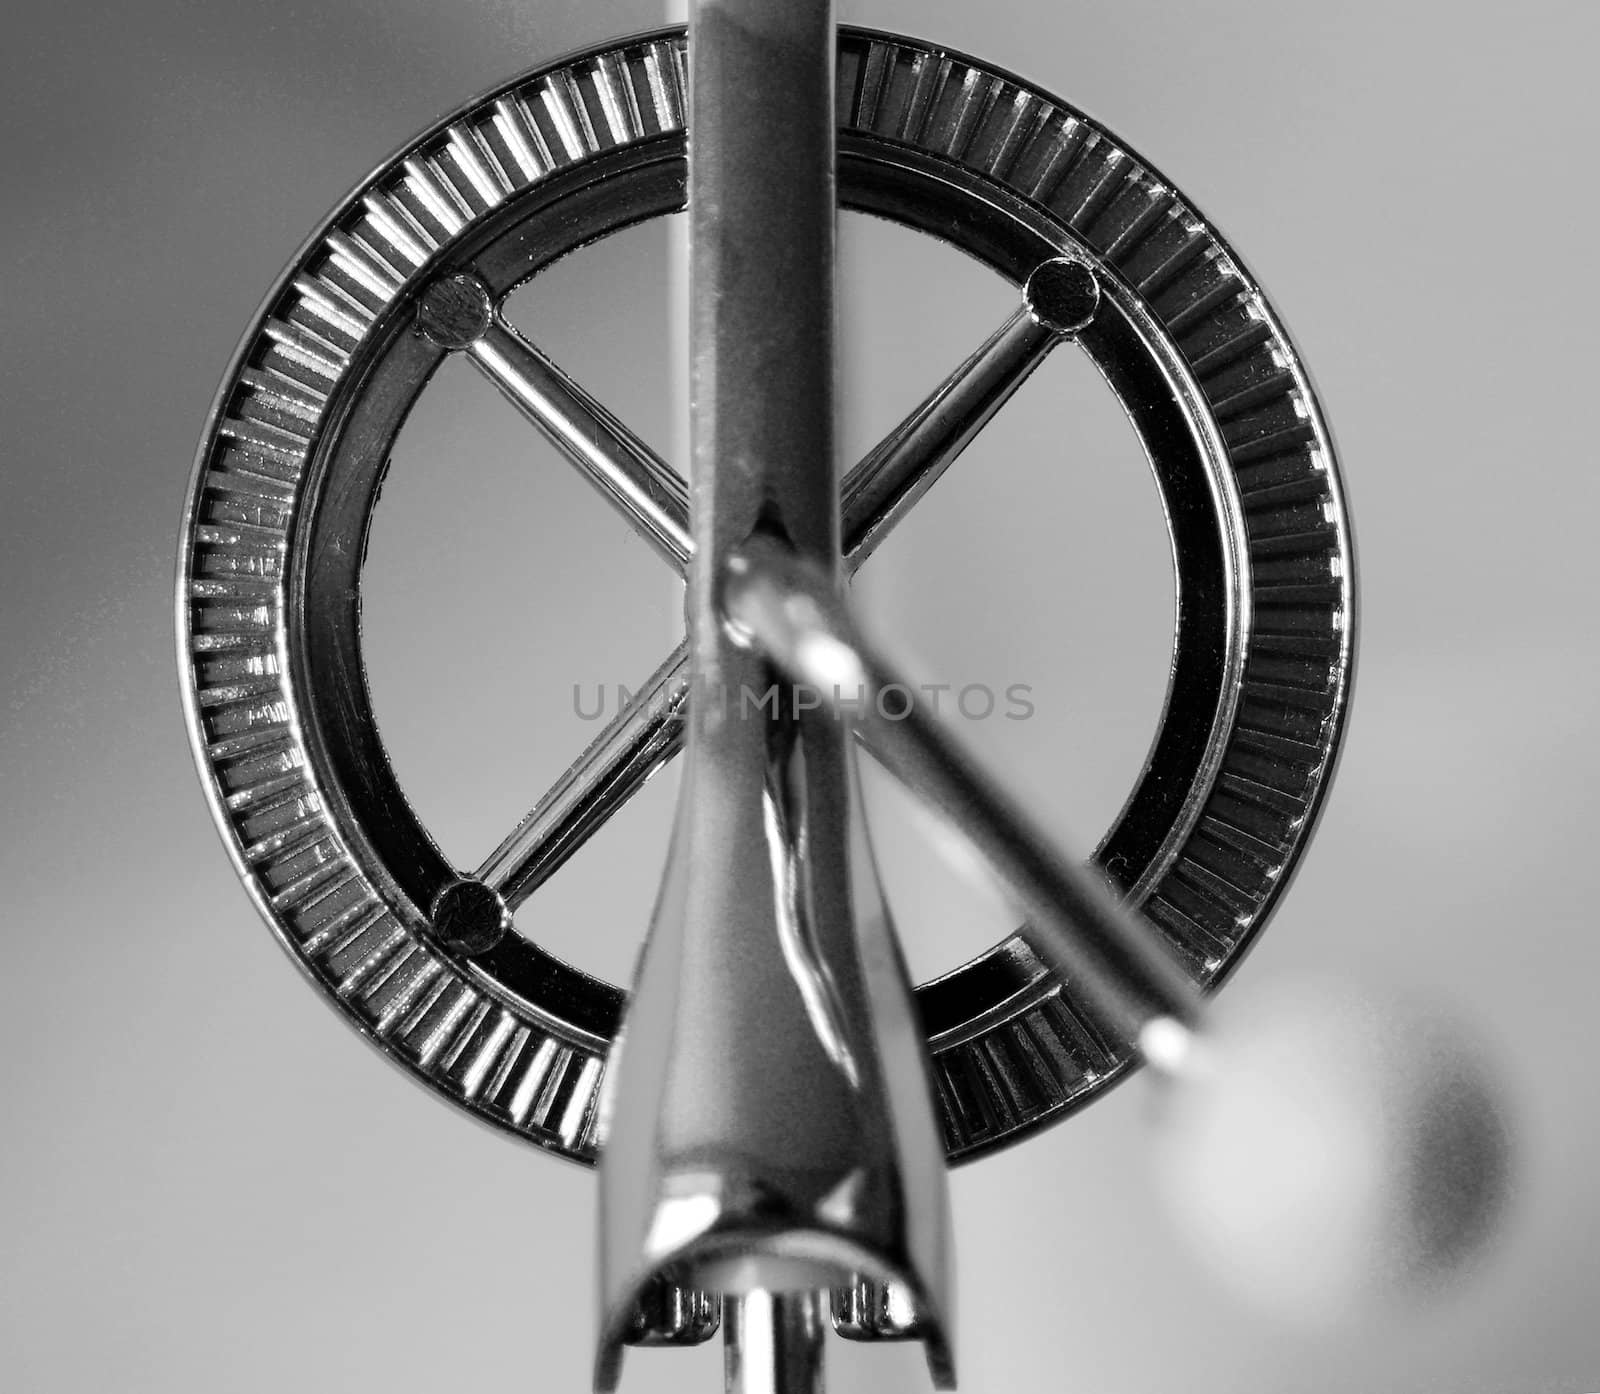 Rotary Whisk Mechanism by pwillitts